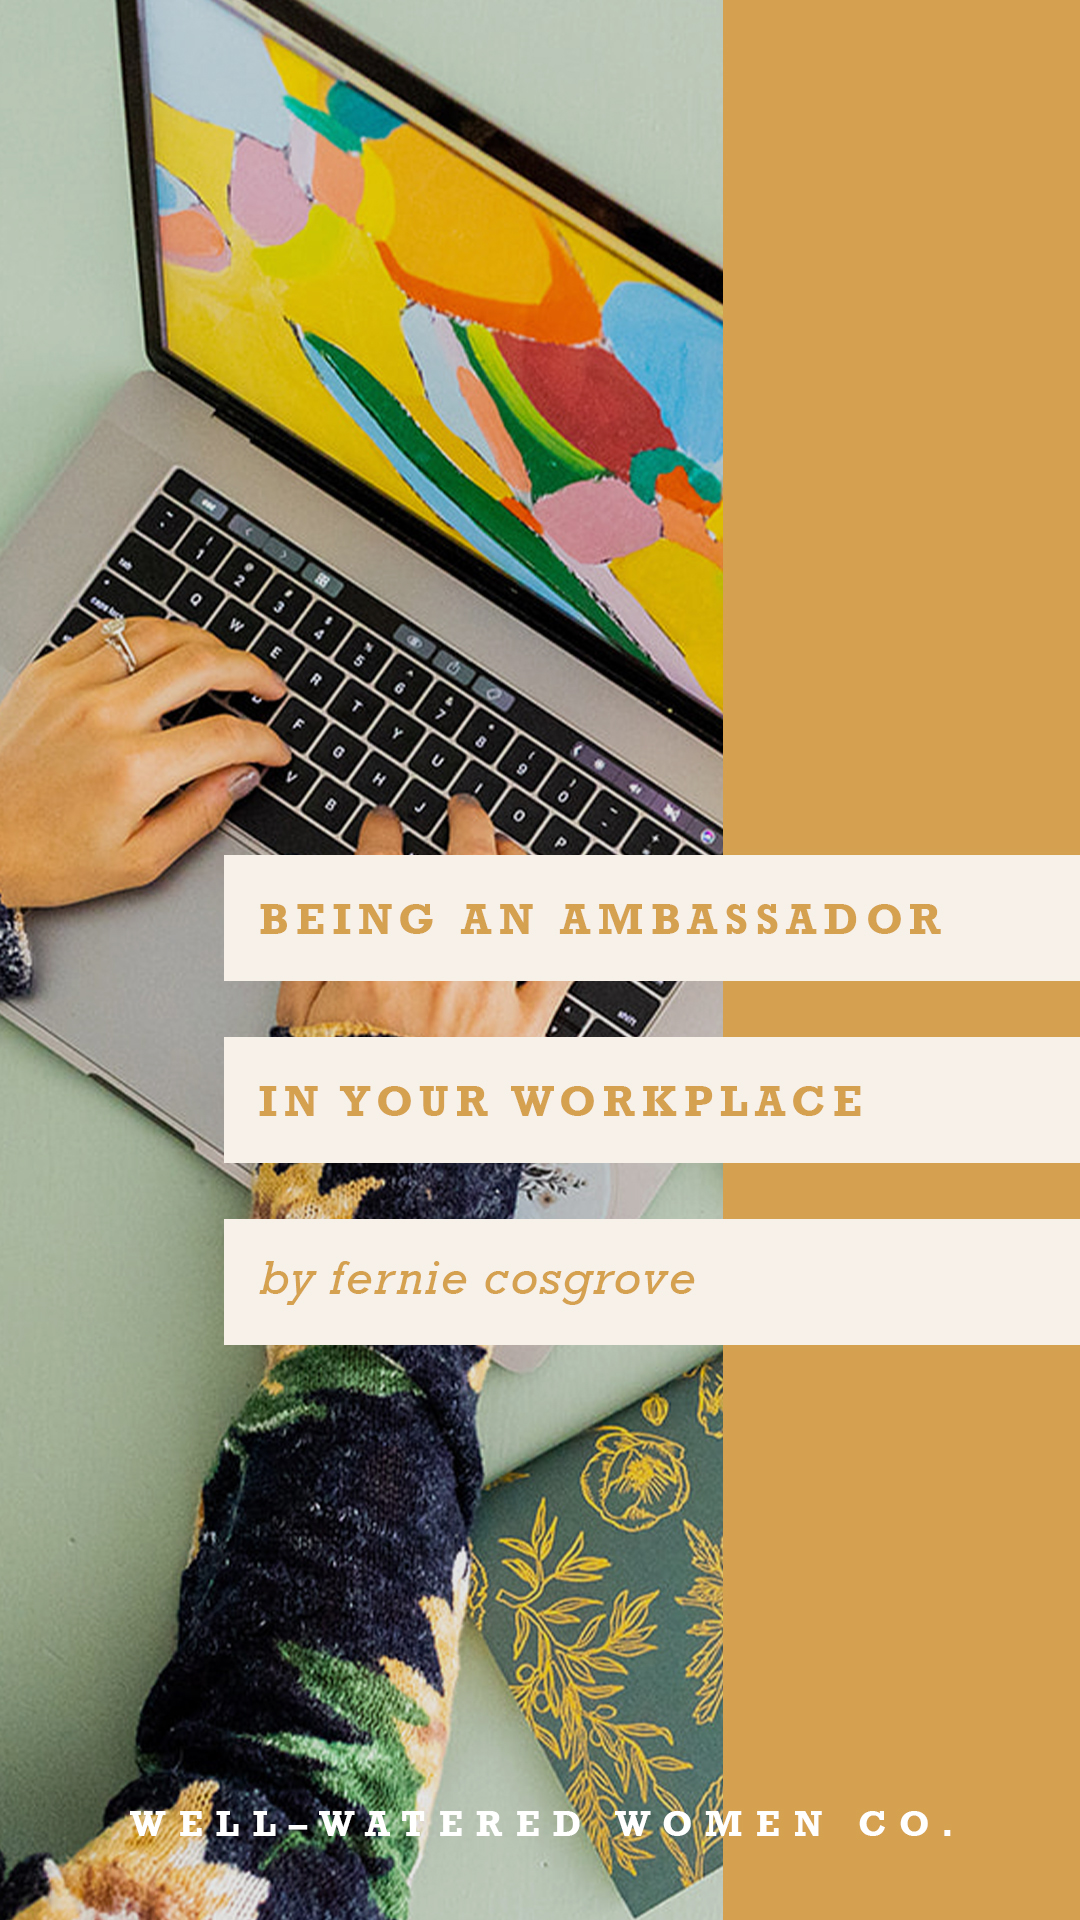 Being an Ambassador in Your Workplace – an Article by Well-Watered Women